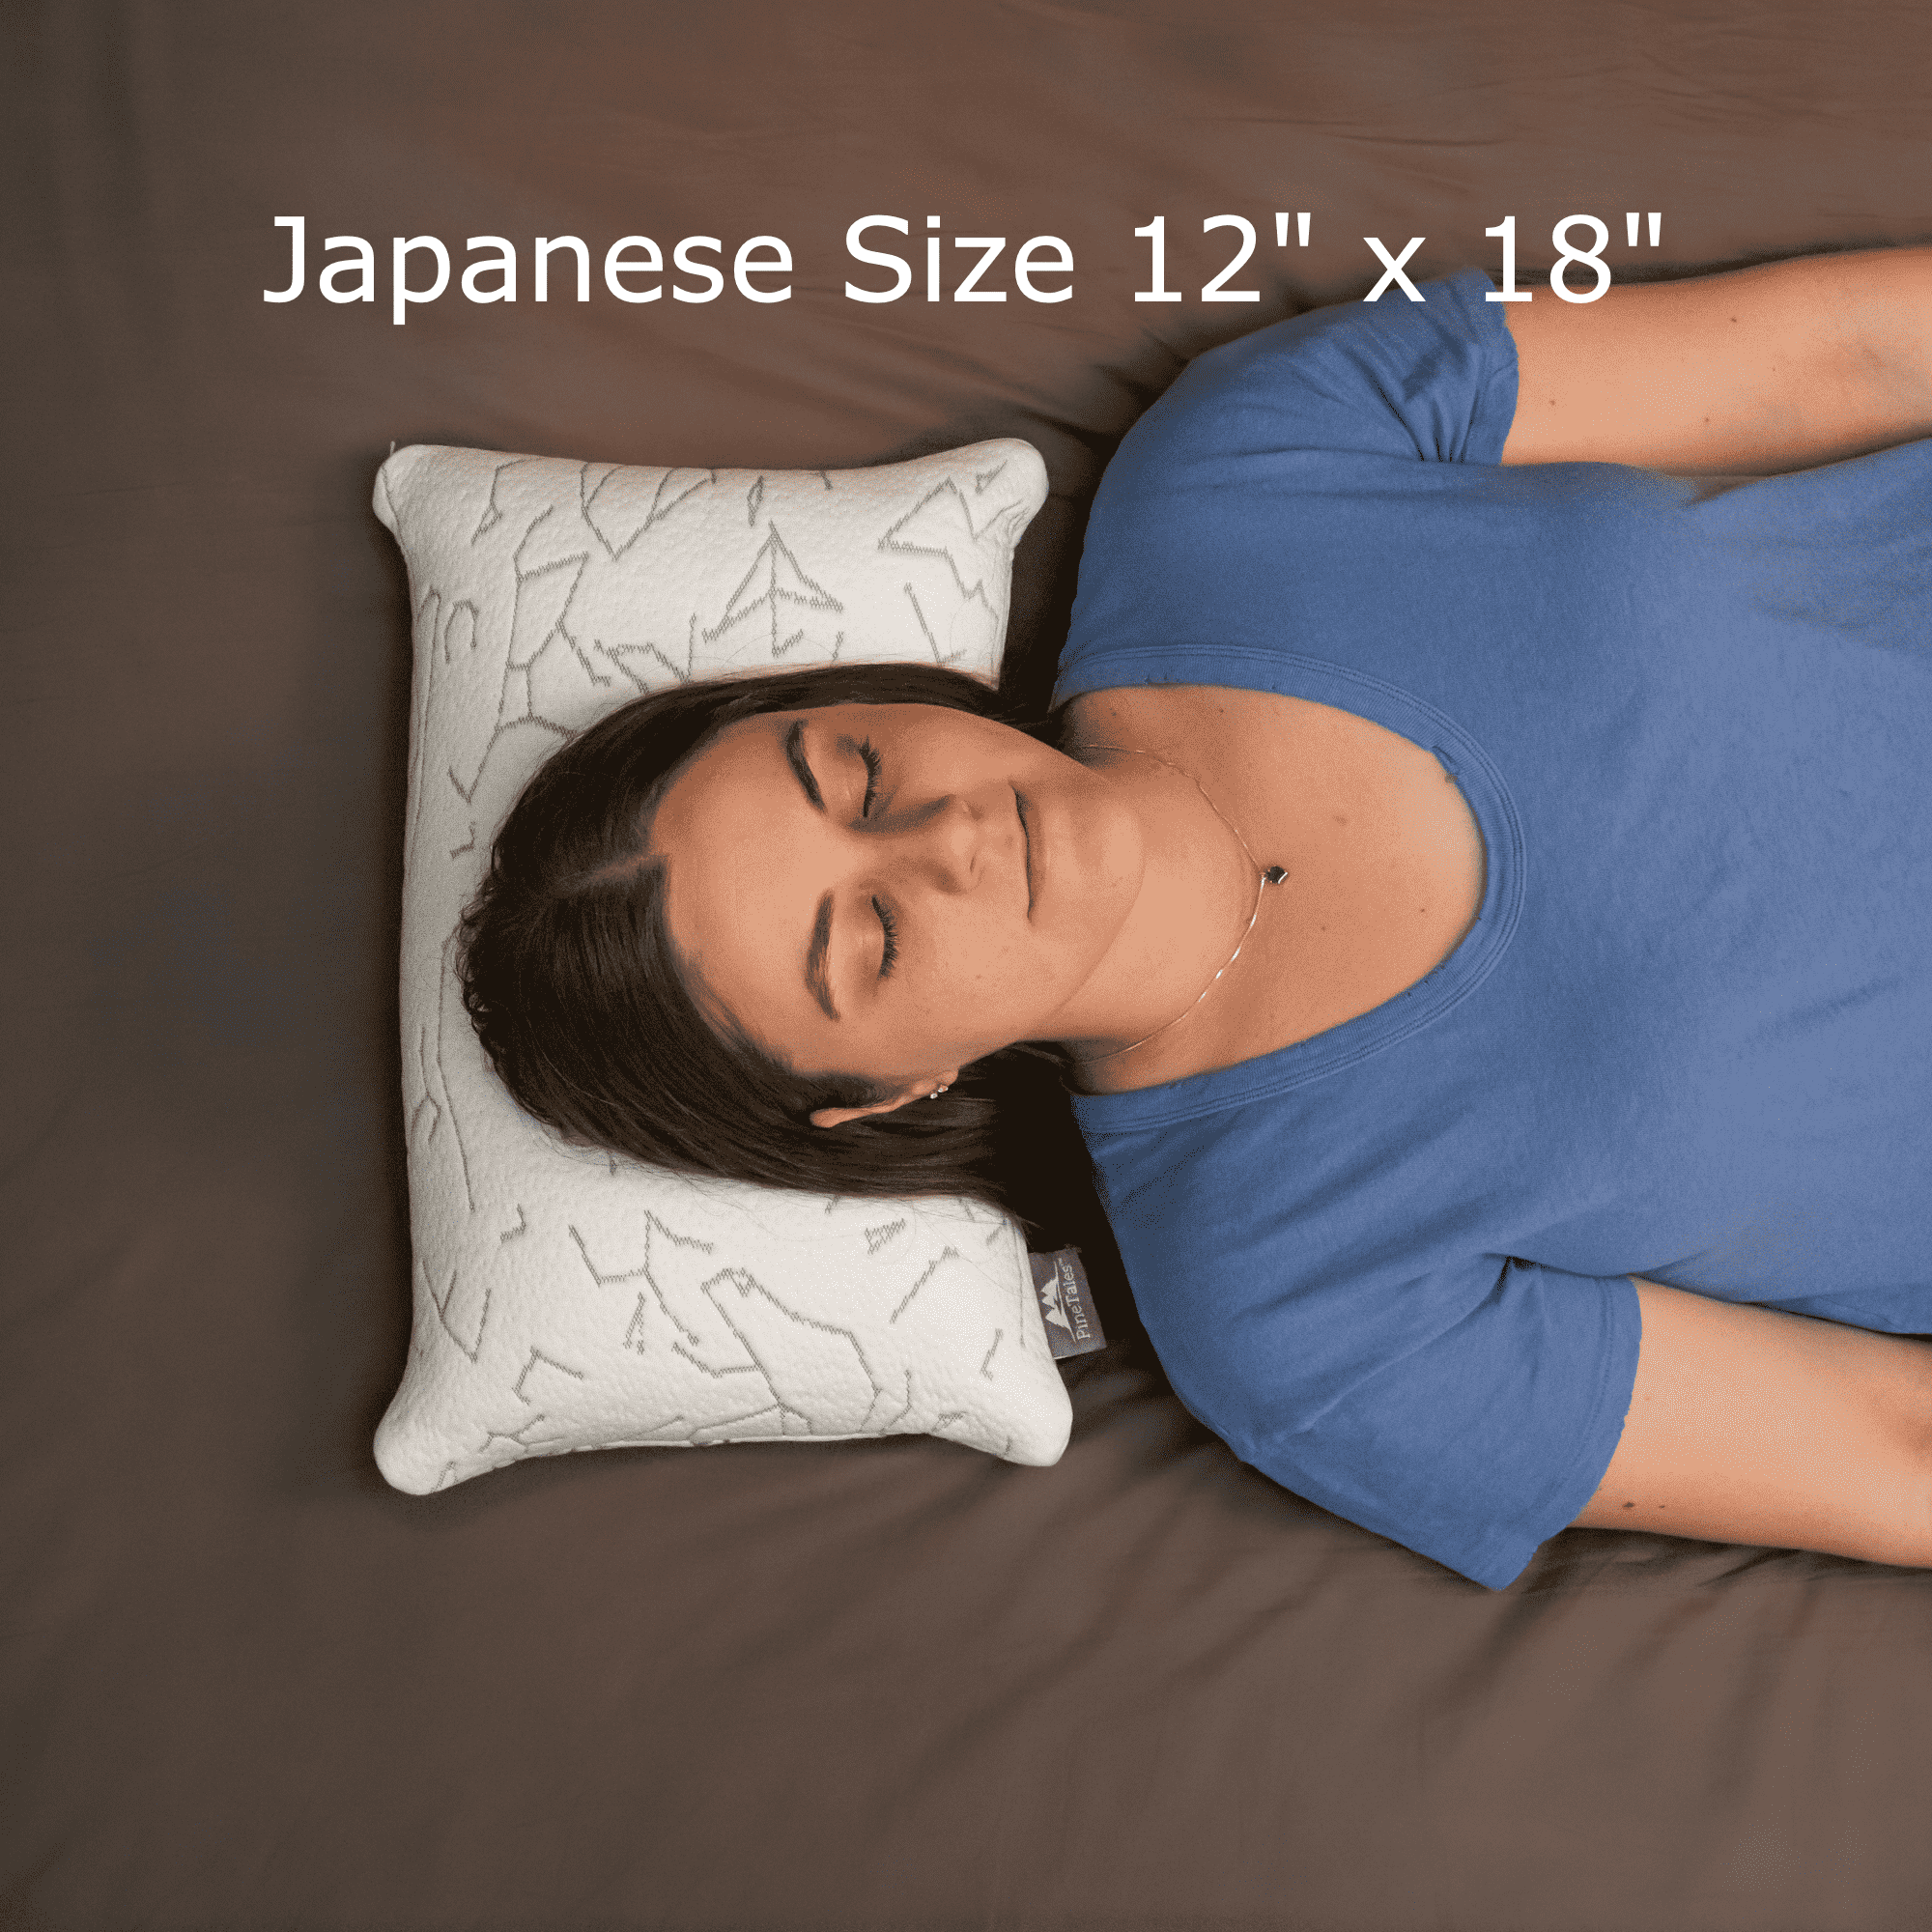 Buckwheat Pillow Size Guide - Japanese Size 12 inches x 18 inches - Woman